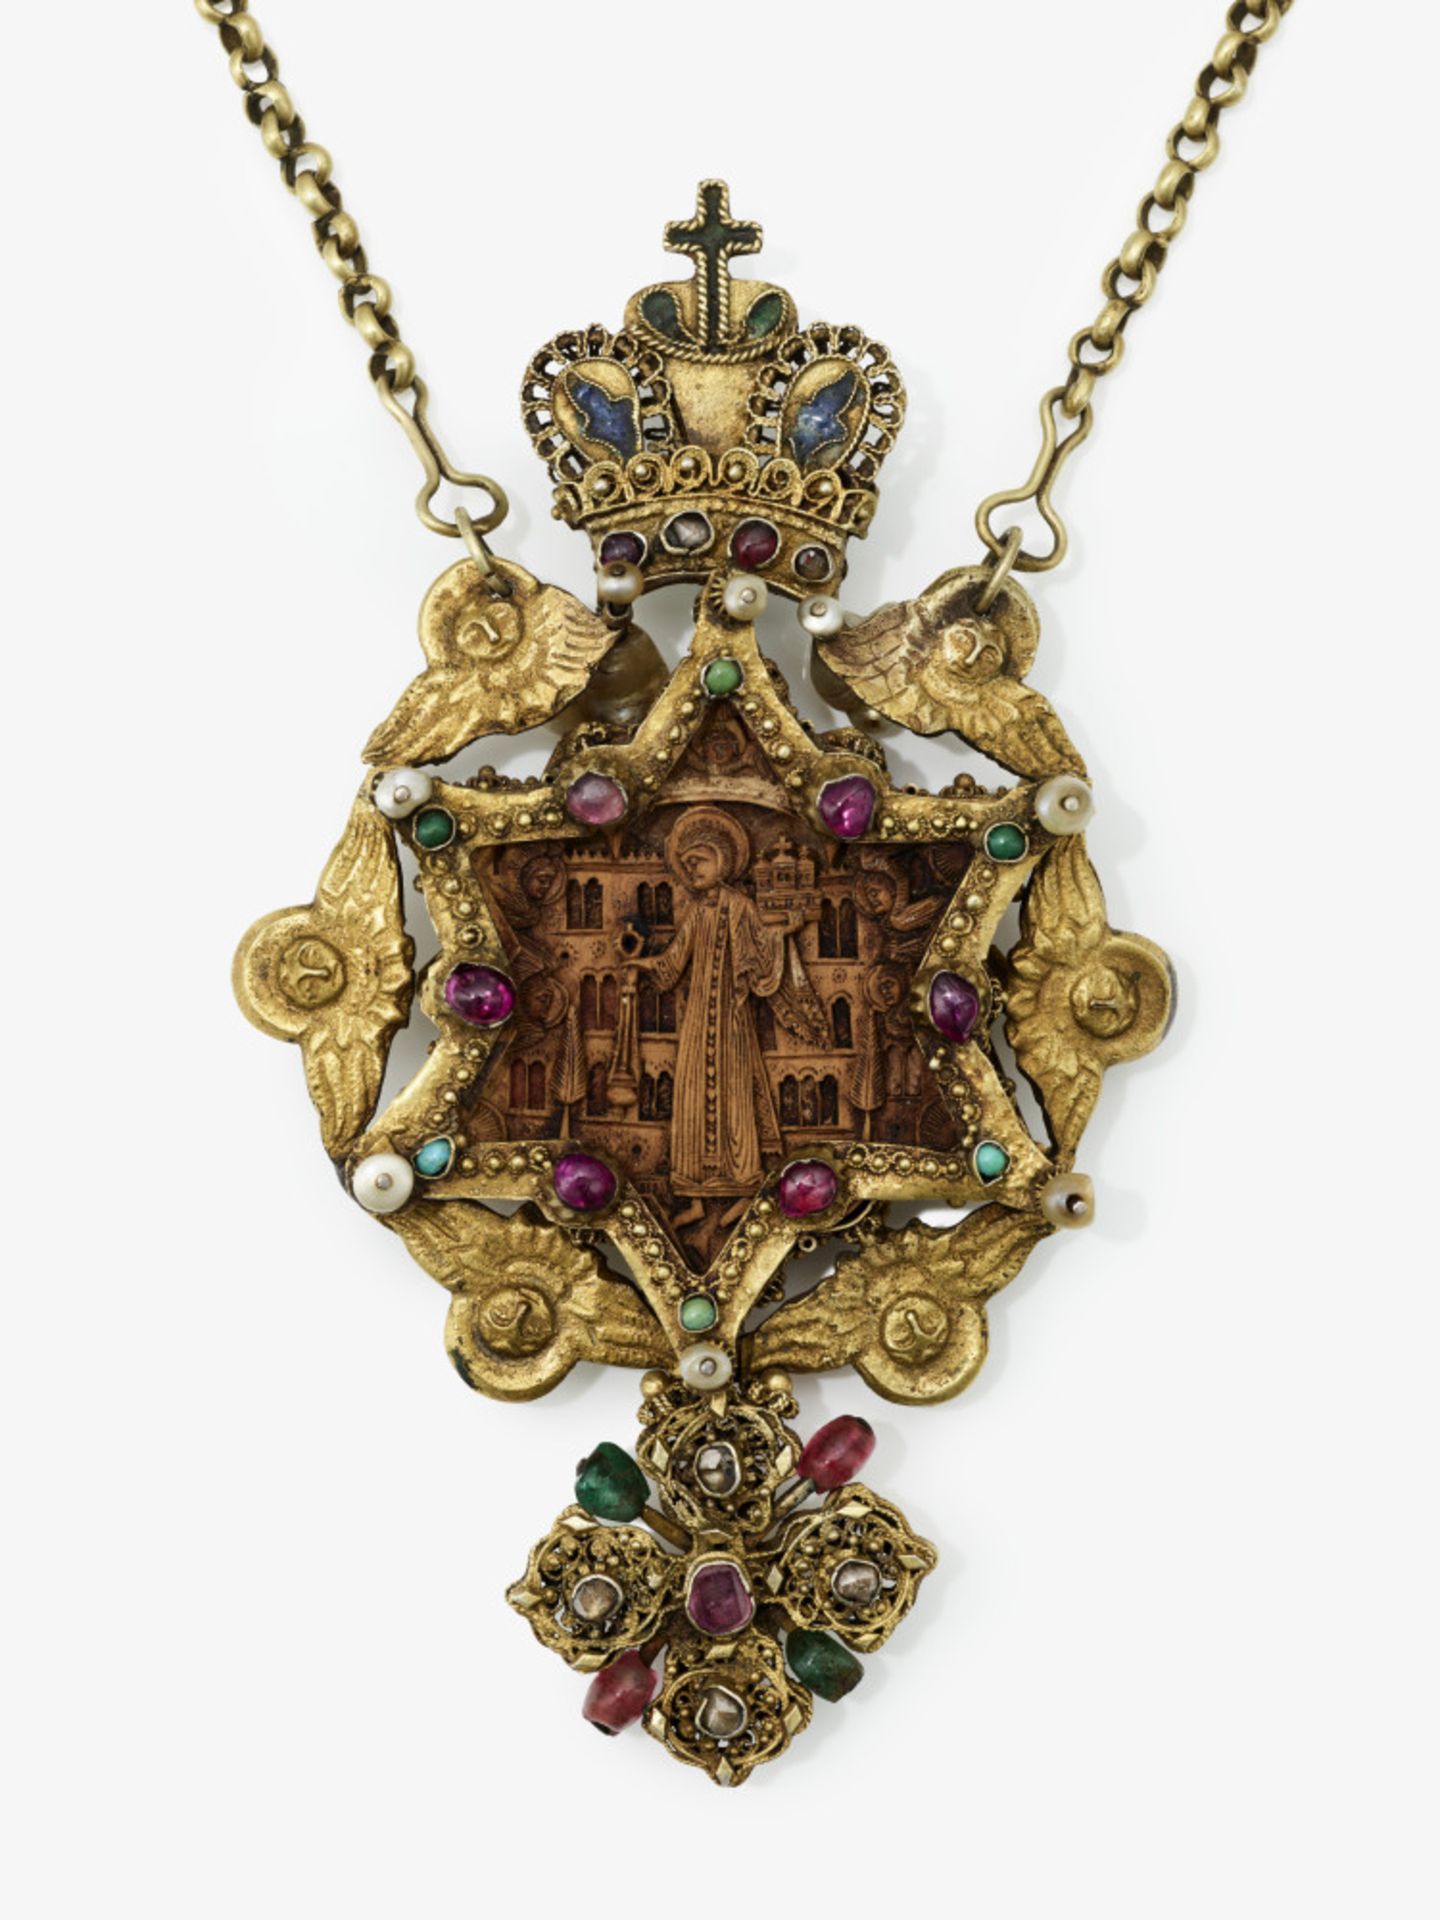 A pectoral pendant with necklace - Carving: probably Berg Athos, 18th century  - Image 4 of 7